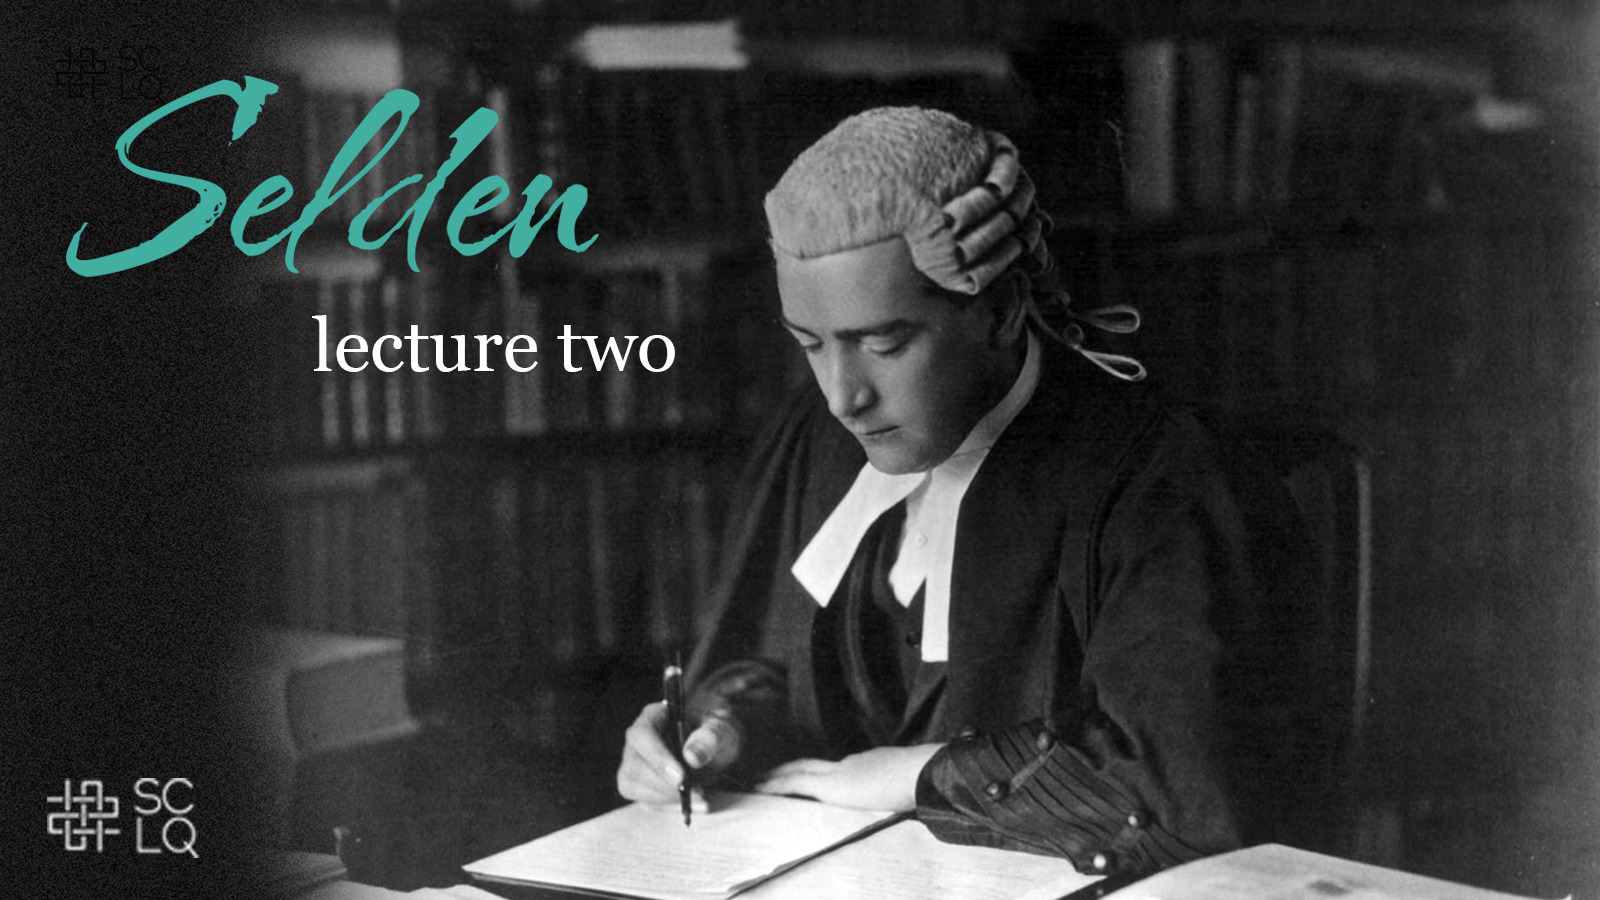 A picture of Robert Menzies with the text 'Selden Lecture two